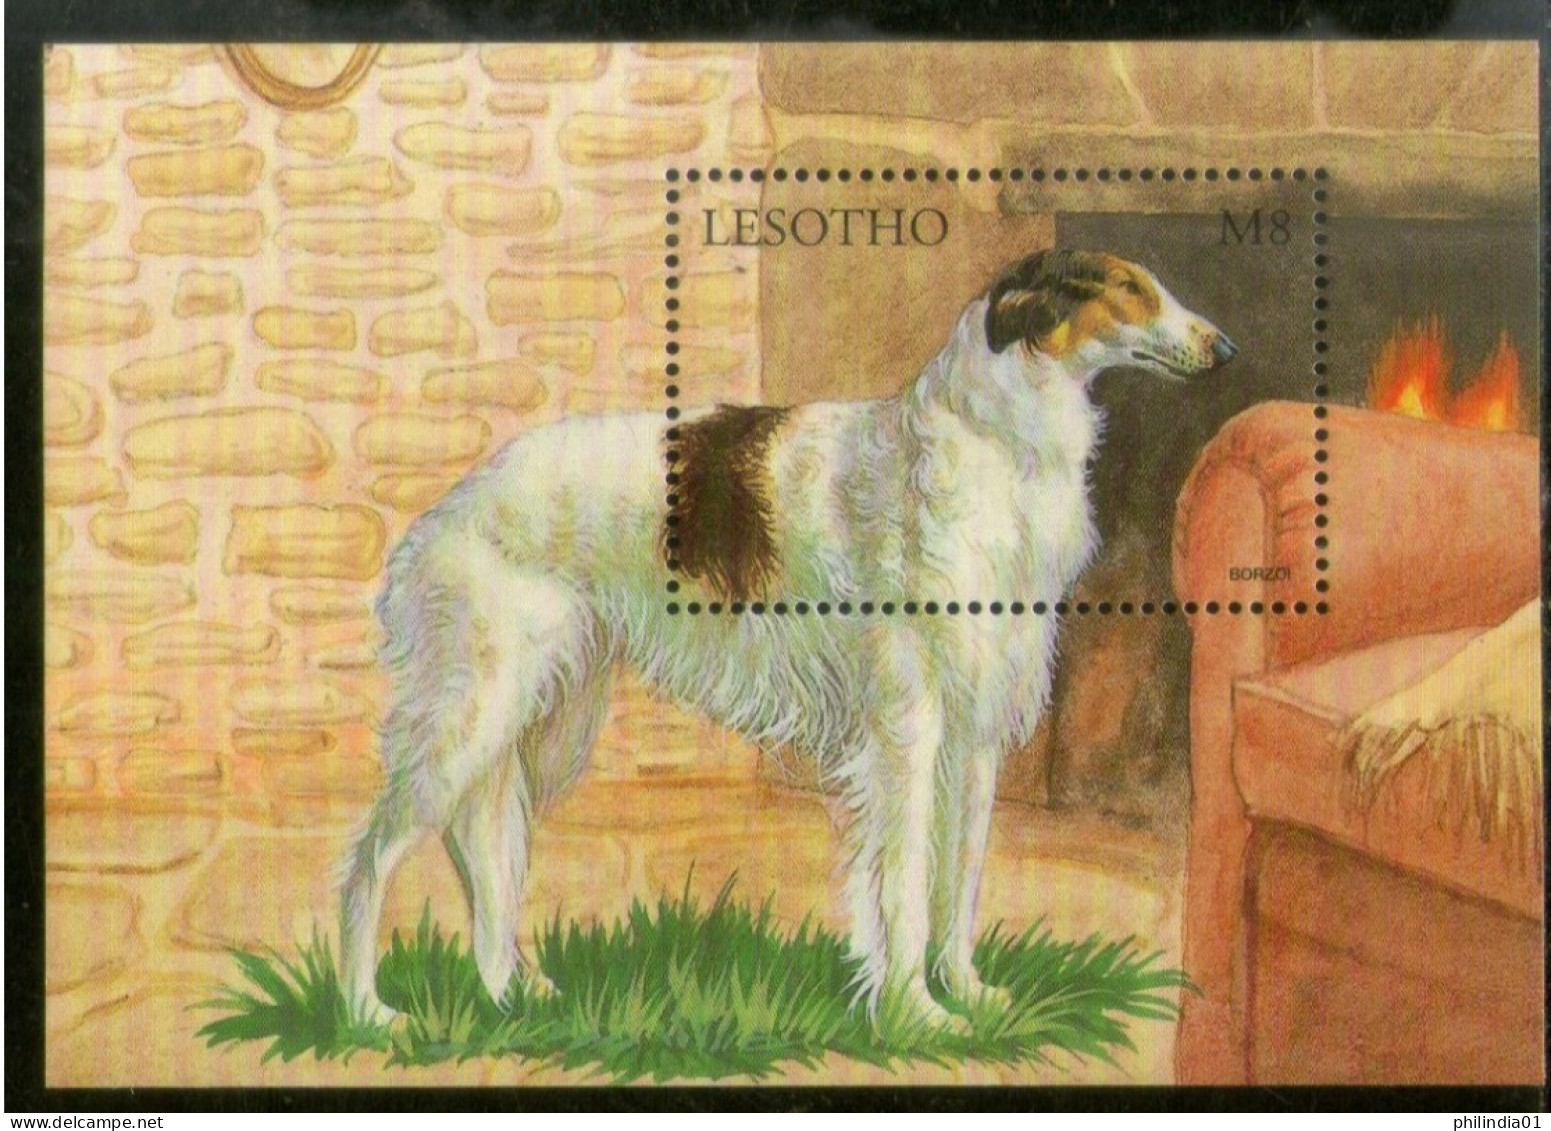 Lesotho 1999 Borzoi Dogs Of World Pet Animals Sc 1176 M/s MNH # 1942 - Chiens